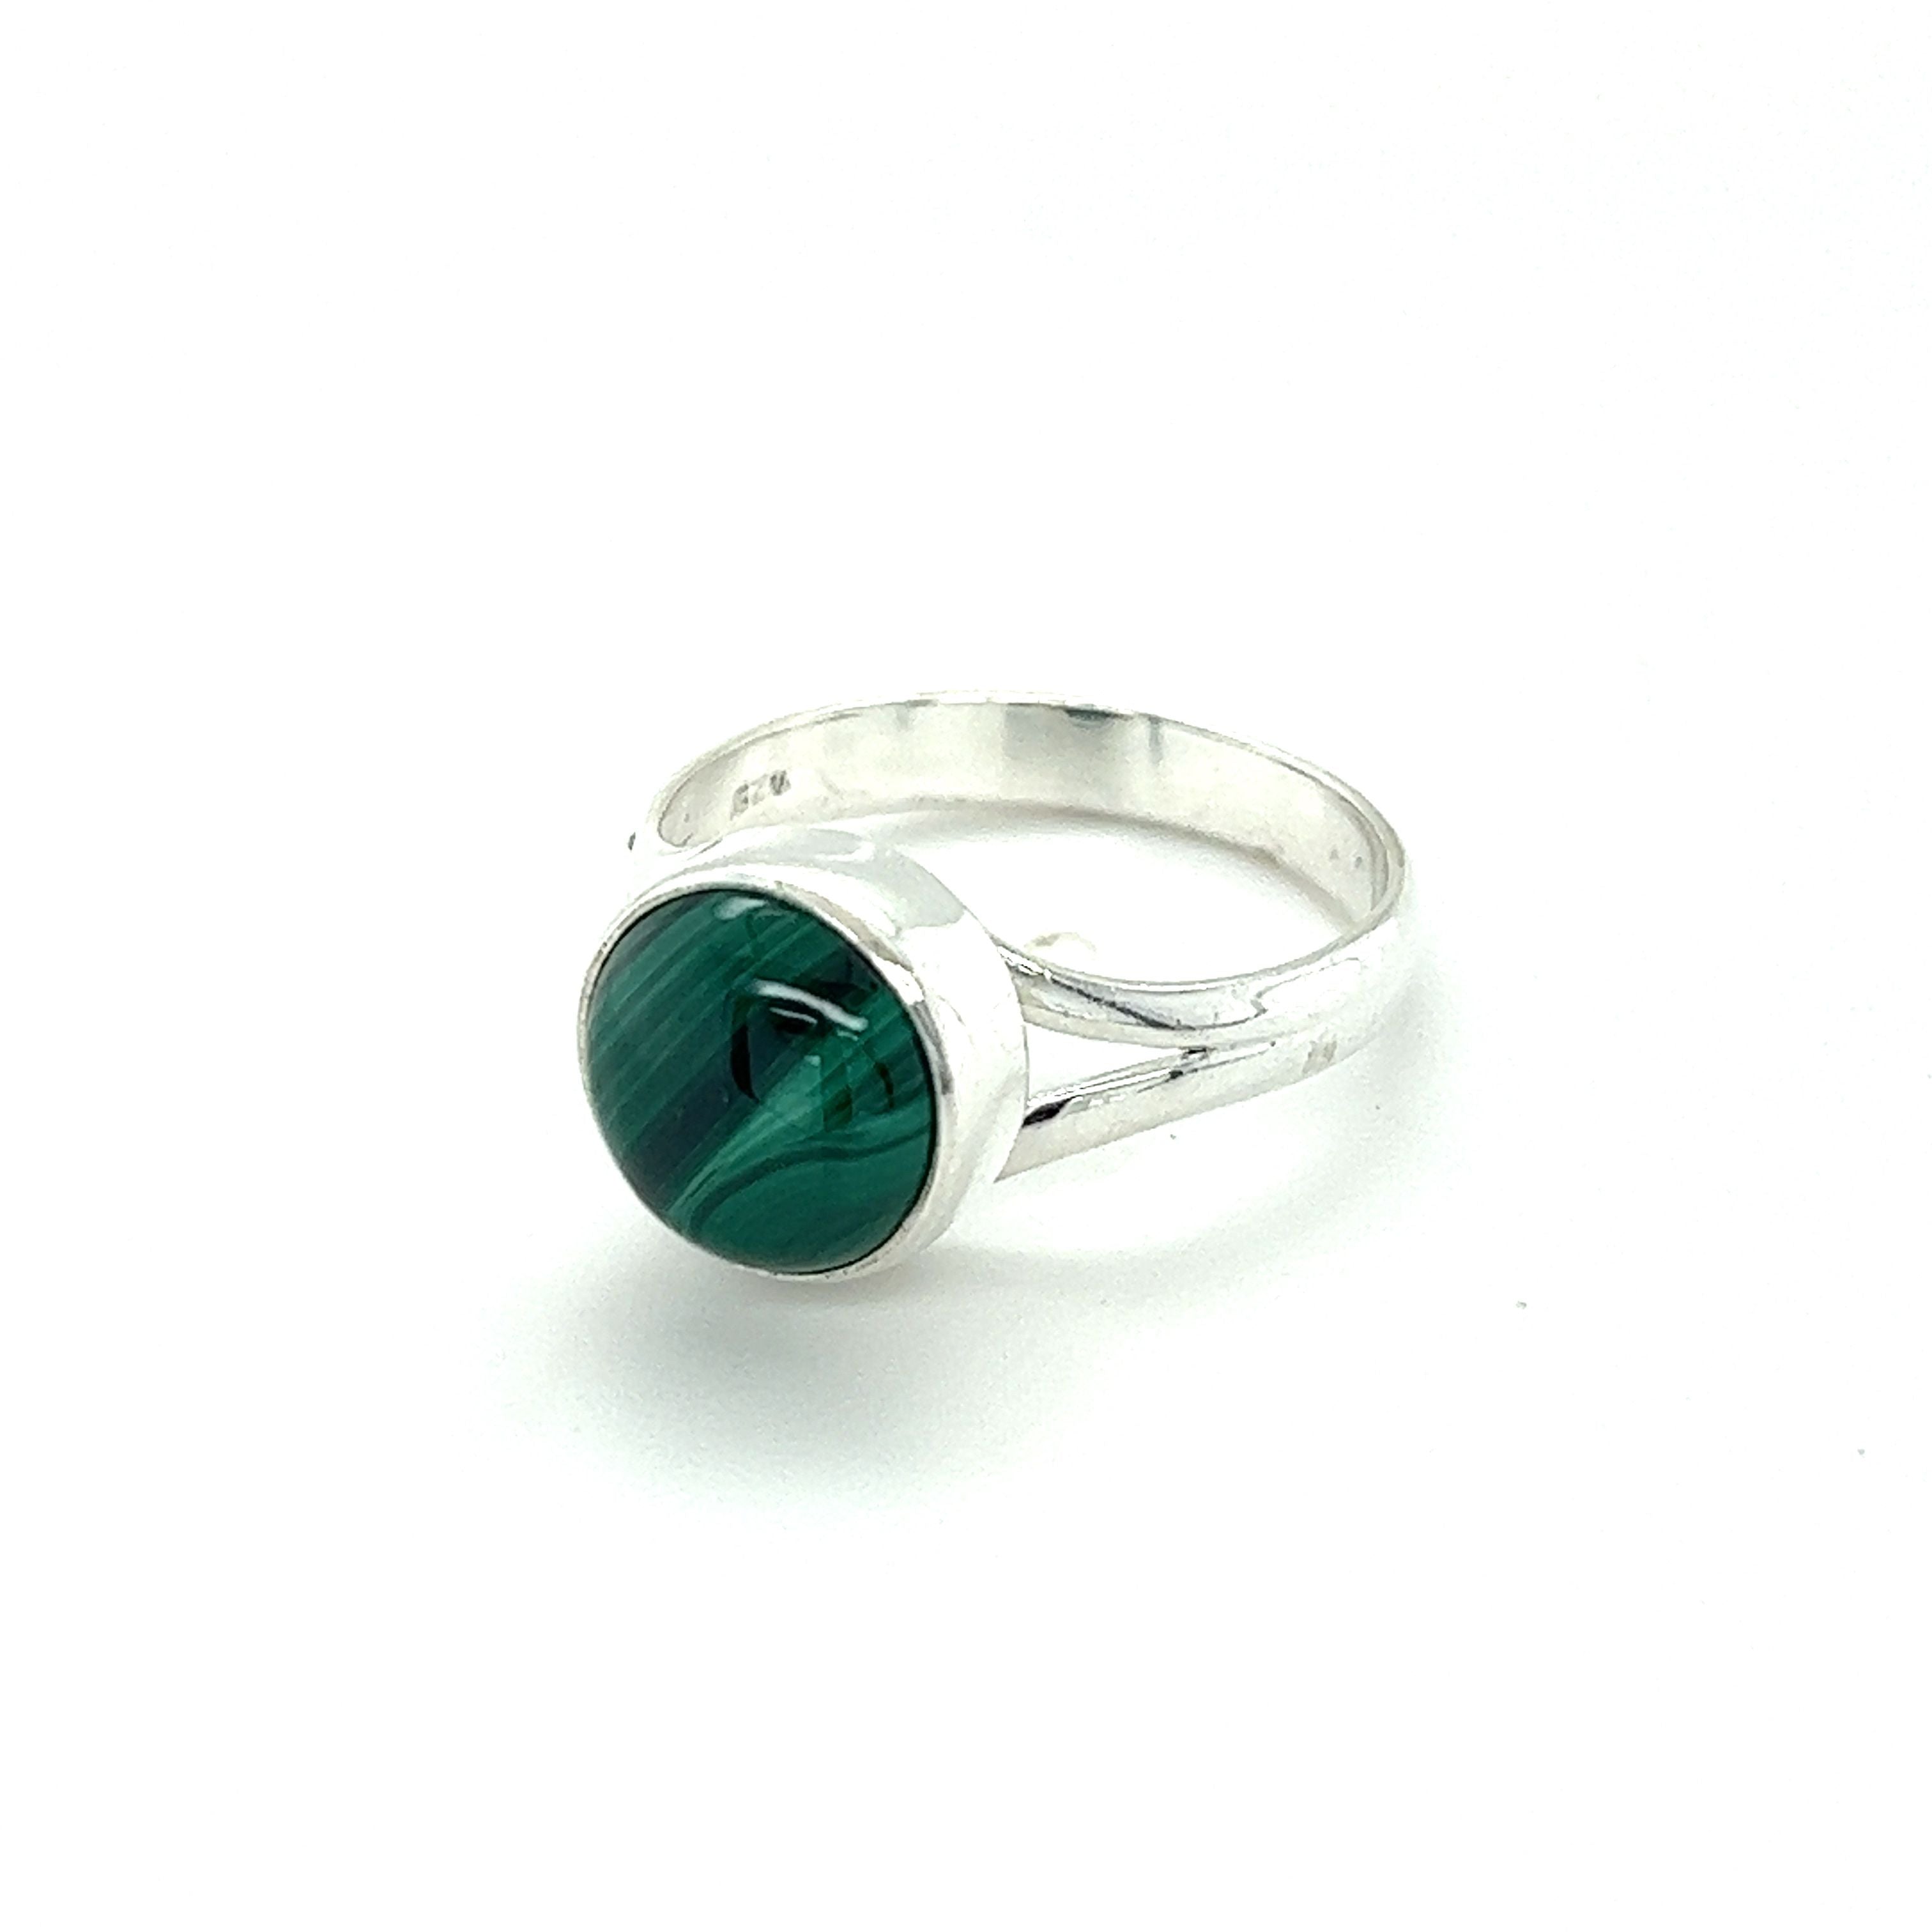 Emerald green stone ring for men gold ring | Stone rings for men, Gold ring  designs, Green stone rings